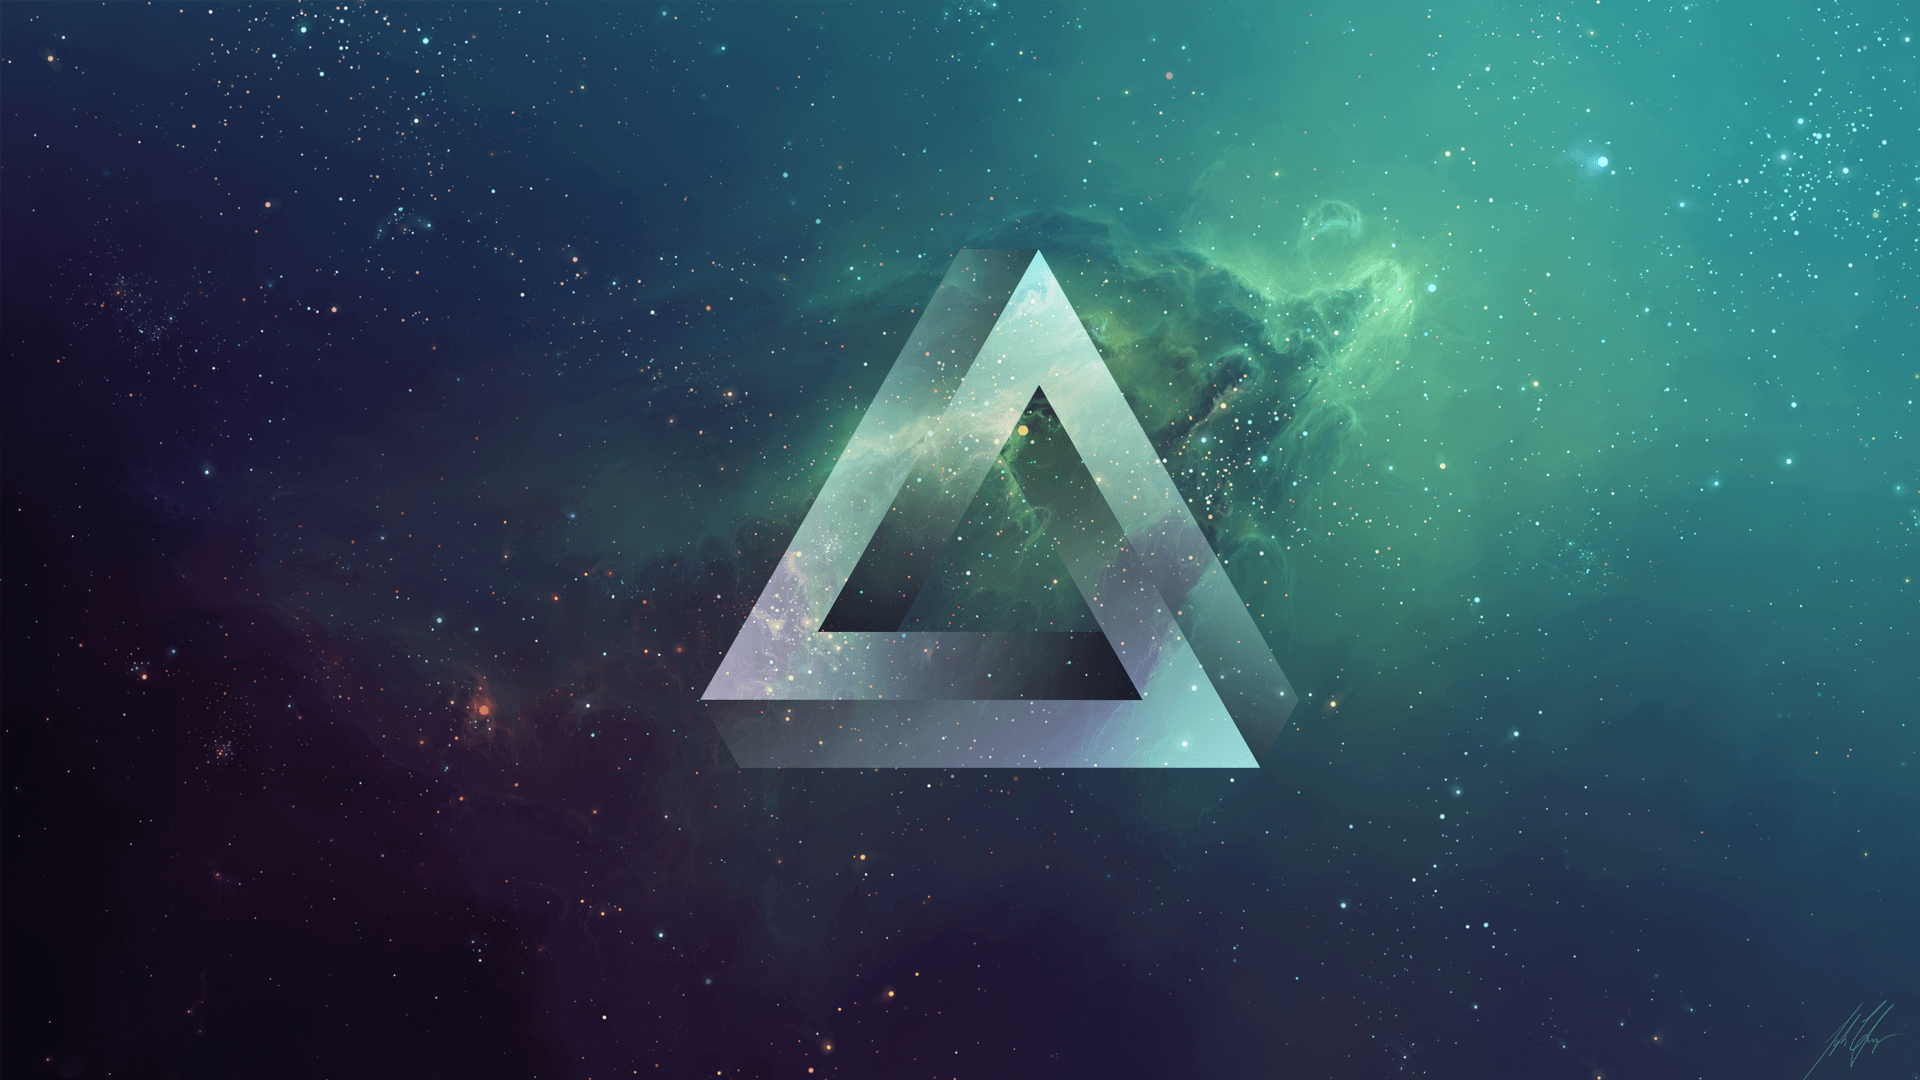 Hipster Triangle Wallpaper 24886